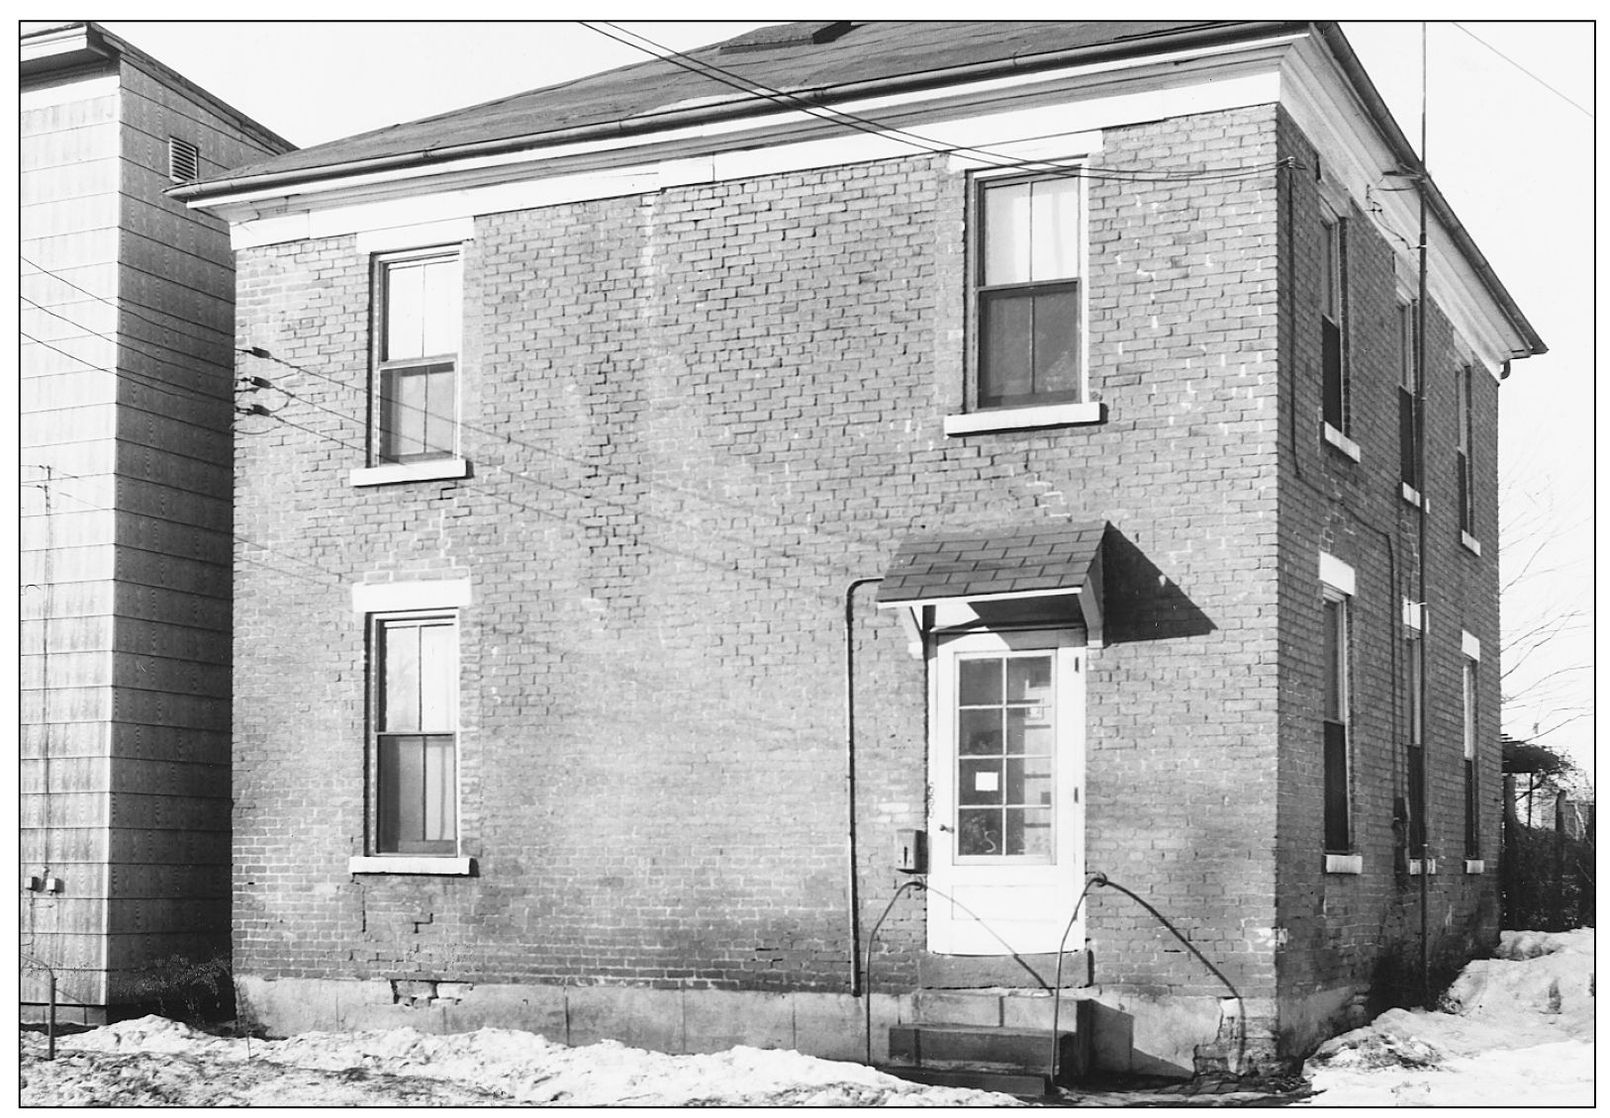 The Samuel Shaffer residence built in 1842 was located on Main Street now - photo 10